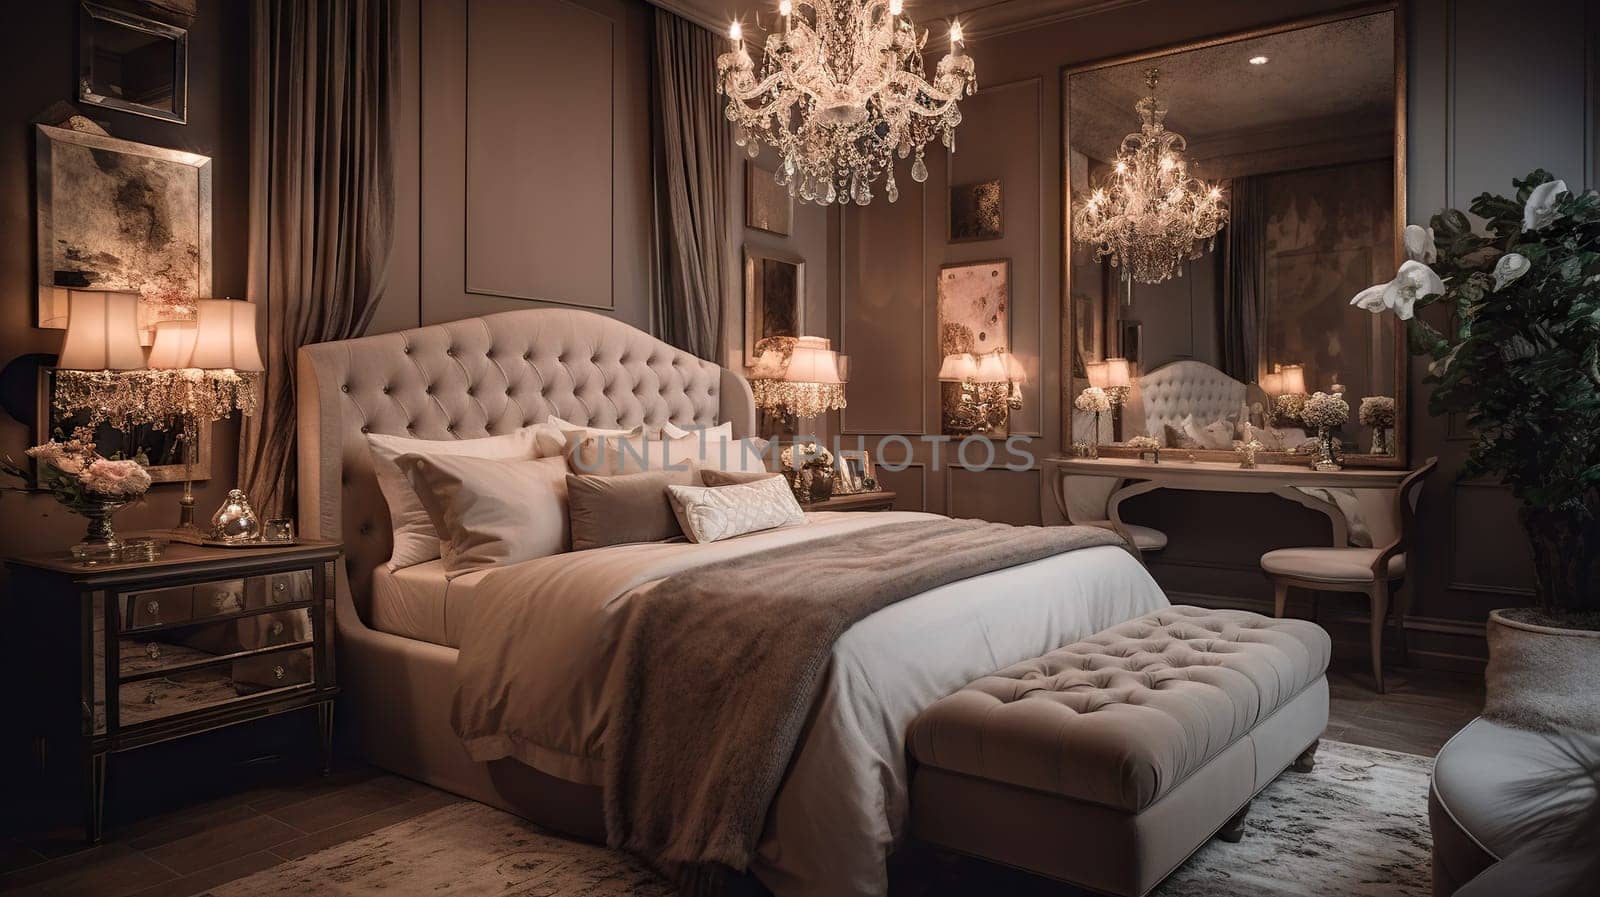 A sumptuously furnished bedroom featuring a plush bed, and vintage decor creating a serene ambiance by chrisroll